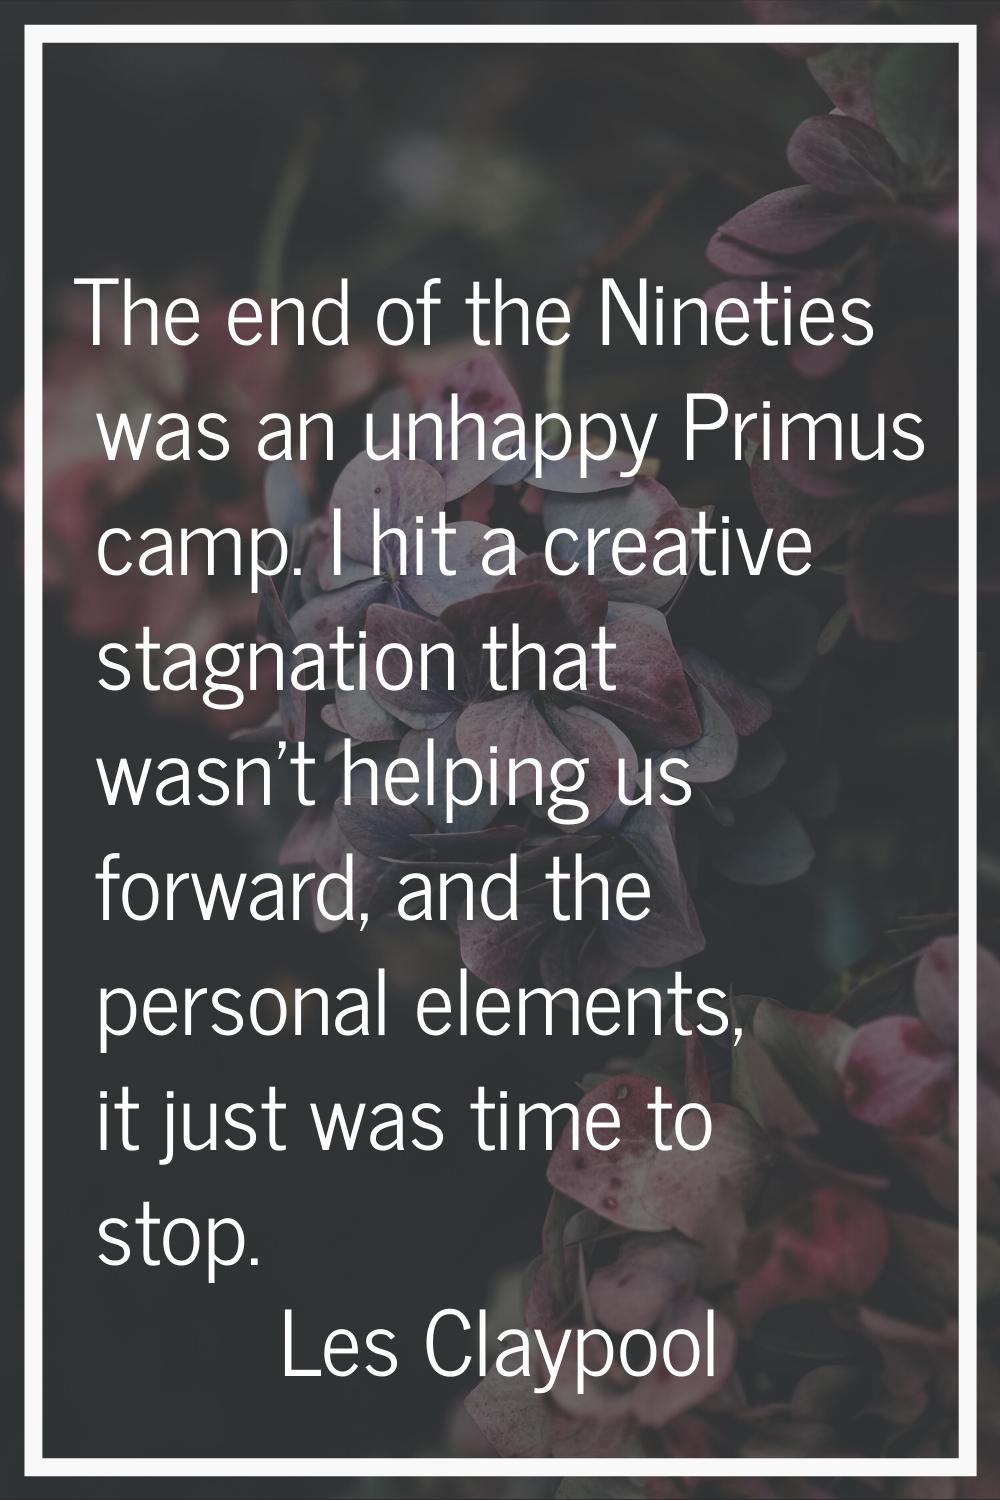 The end of the Nineties was an unhappy Primus camp. I hit a creative stagnation that wasn't helping